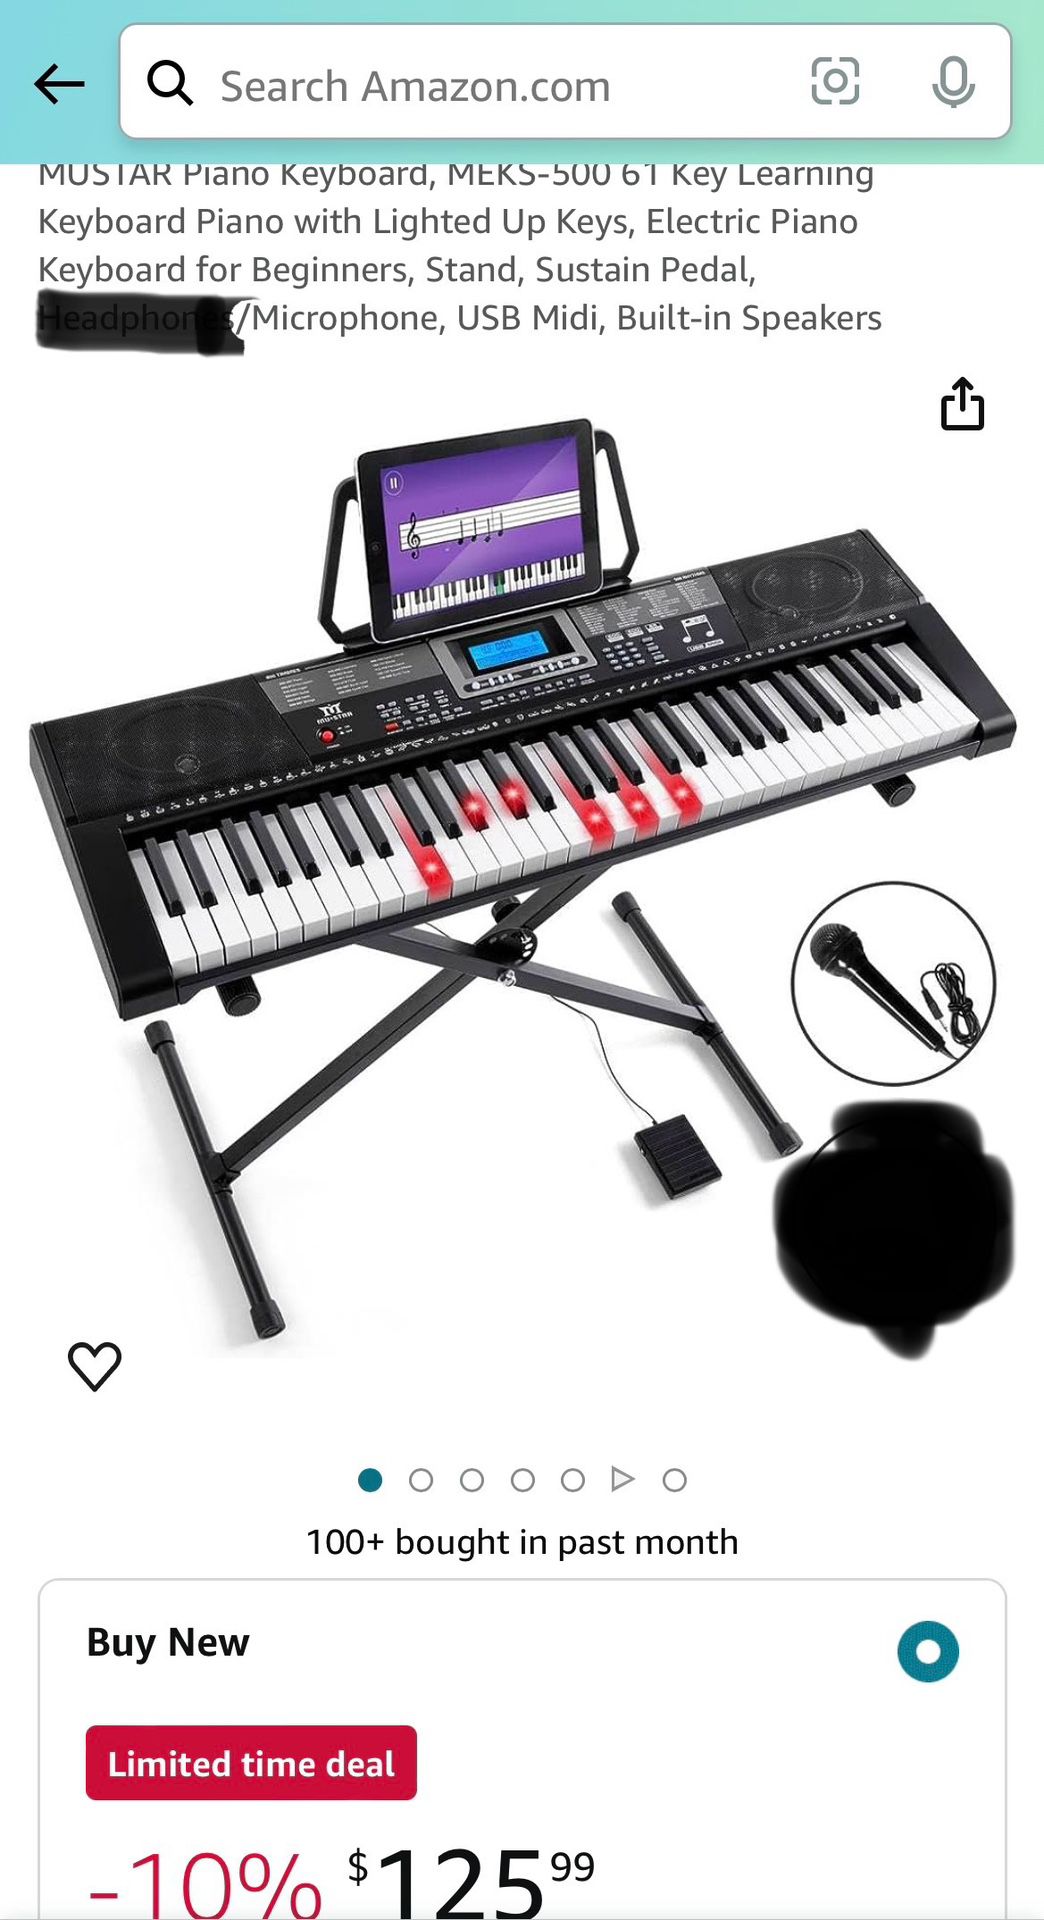 NOTE: No Headphone or Note Holder. NEW MUSTAR Piano Keyboard, MEKS-500 61 Key Learning Keyboard Piano with Lighted Up Keys, Electric Piano Keyboard fo